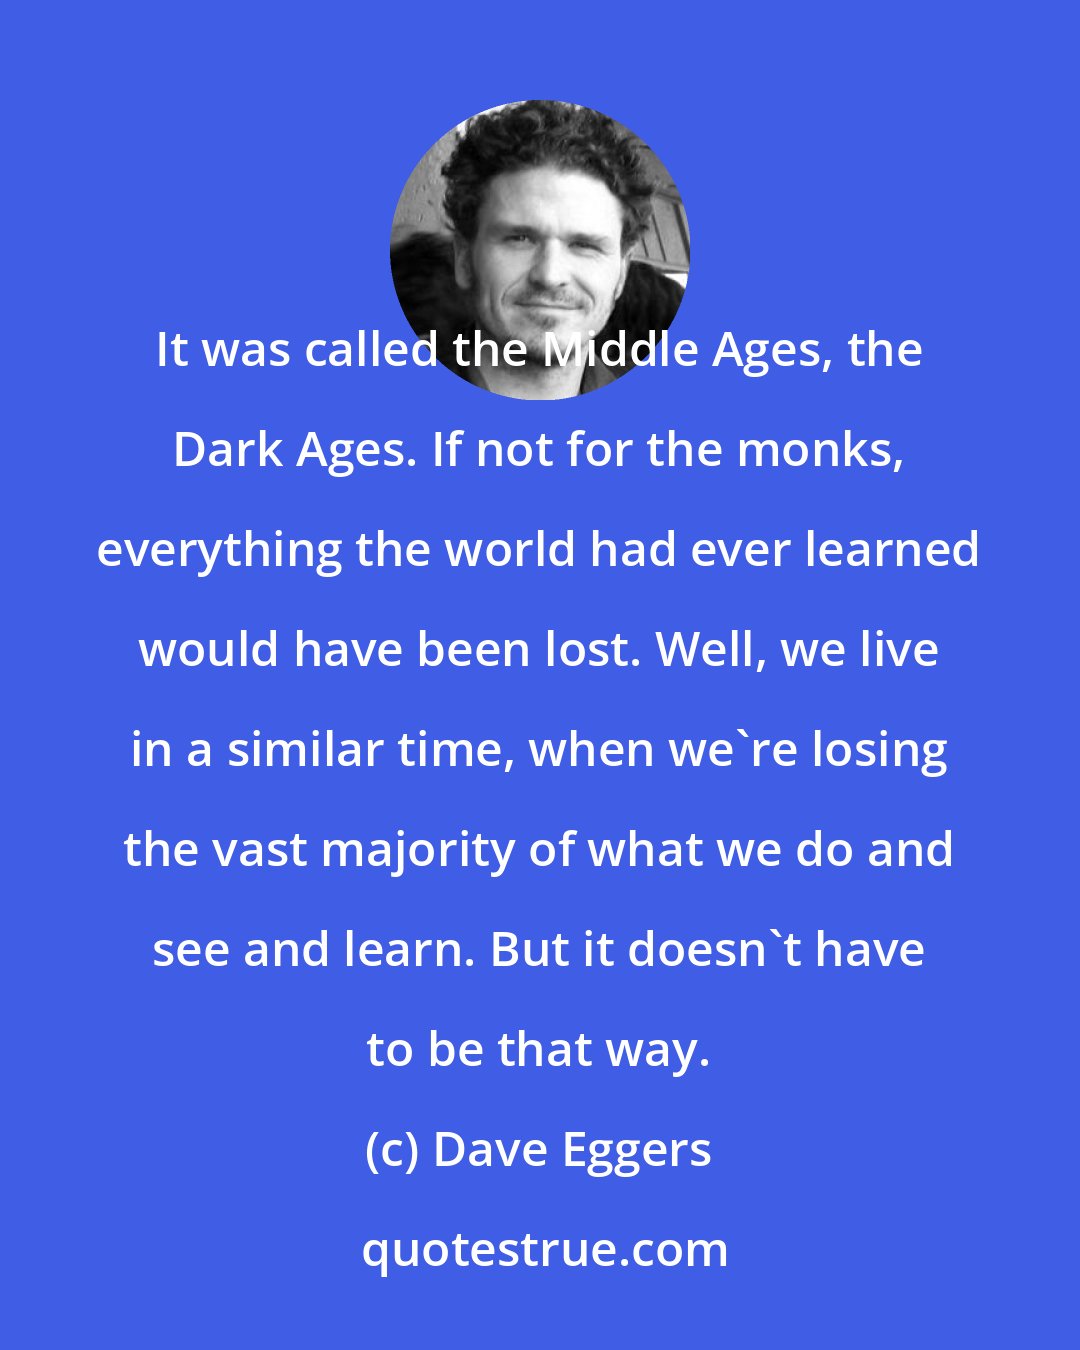 Dave Eggers: It was called the Middle Ages, the Dark Ages. If not for the monks, everything the world had ever learned would have been lost. Well, we live in a similar time, when we're losing the vast majority of what we do and see and learn. But it doesn't have to be that way.